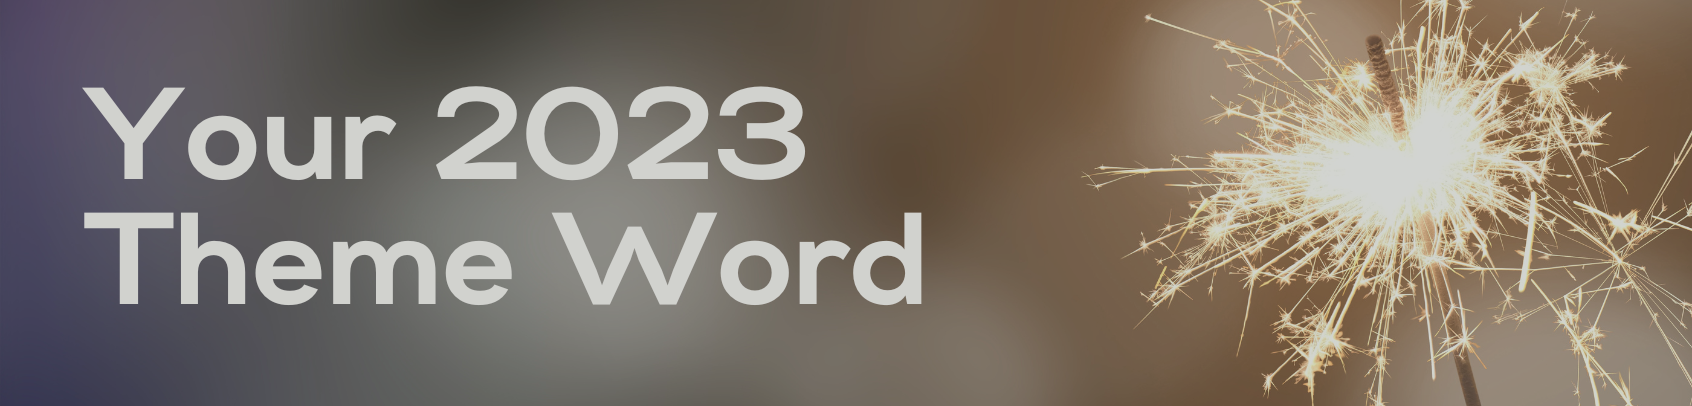 What will your 2023 theme word be?